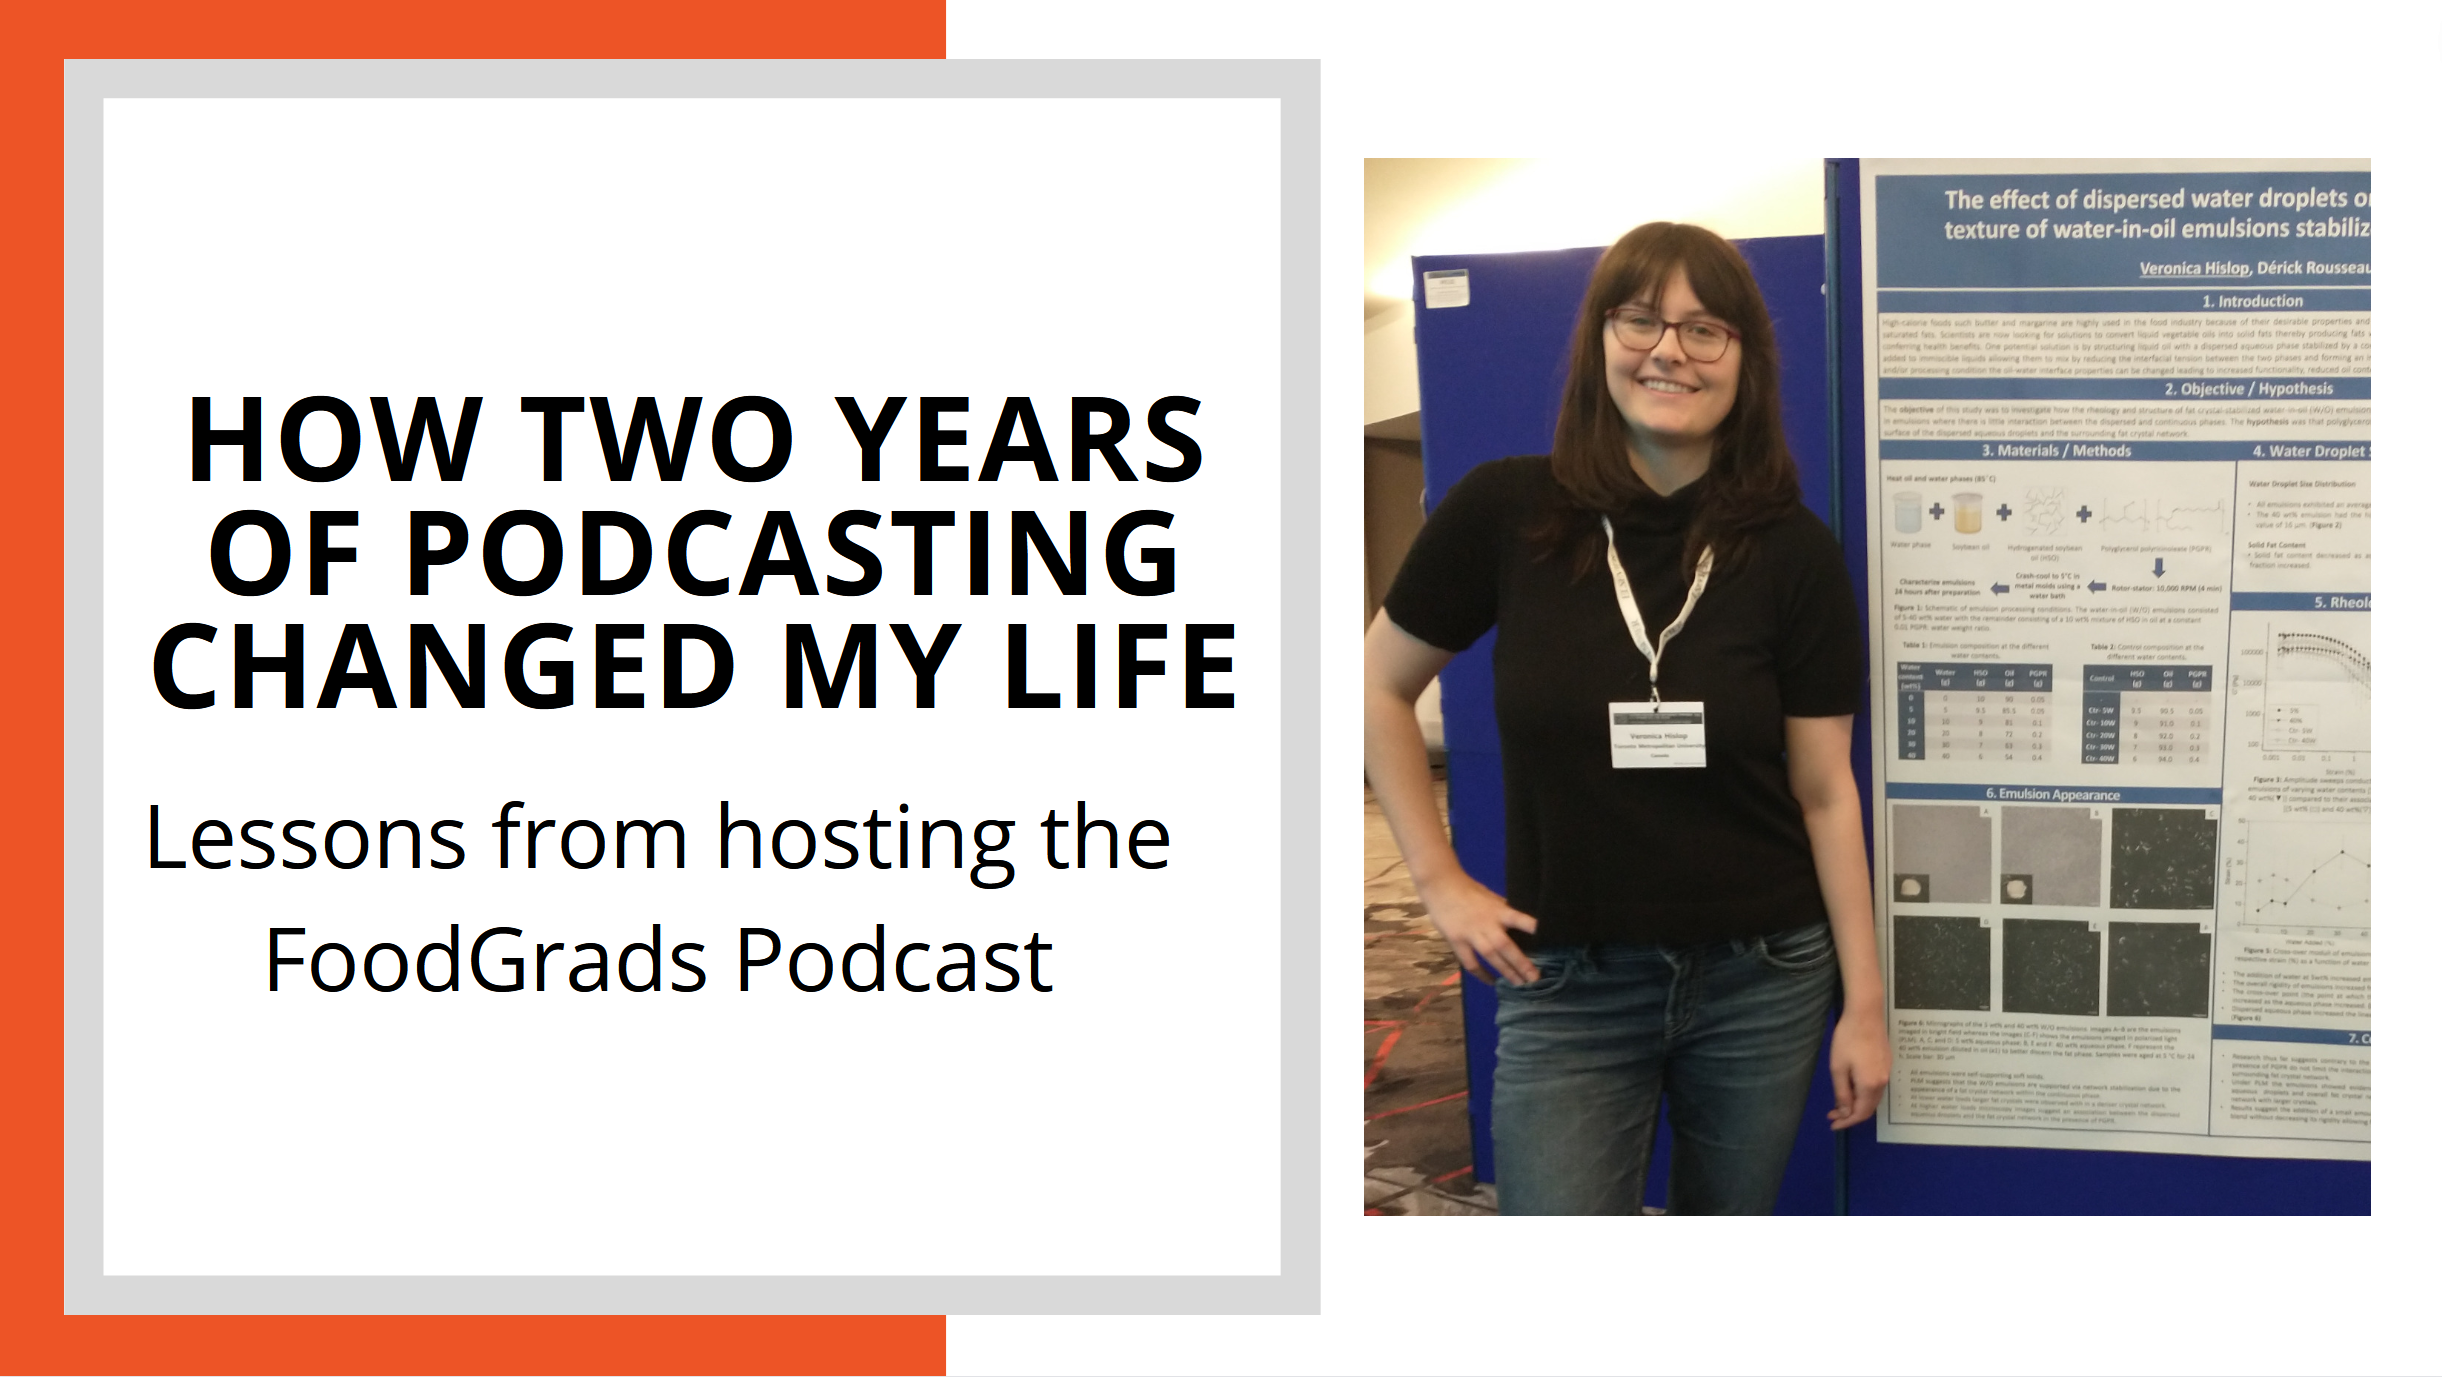 How two years of podcasting changed my life